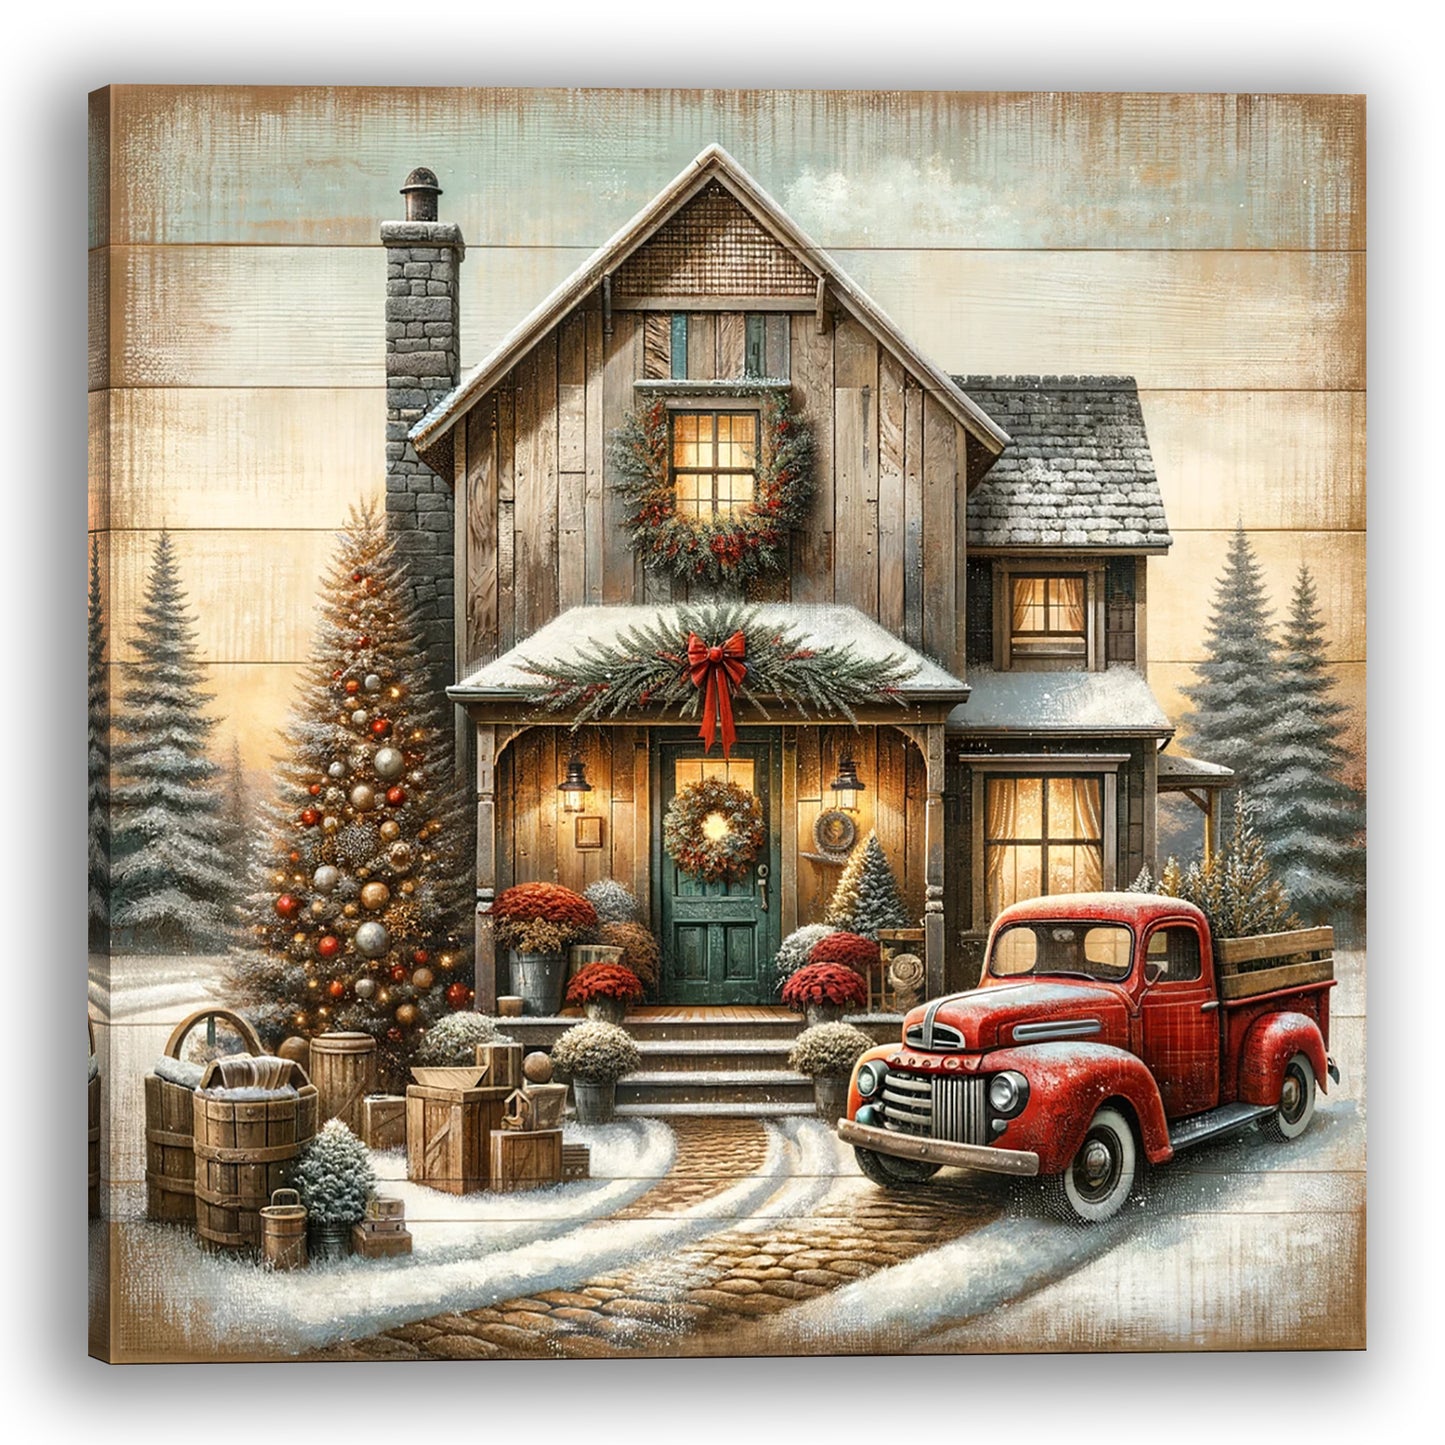 "Home for the Holidays - Vintage Christmas Homestead" Wrapped Canvas Art Prints